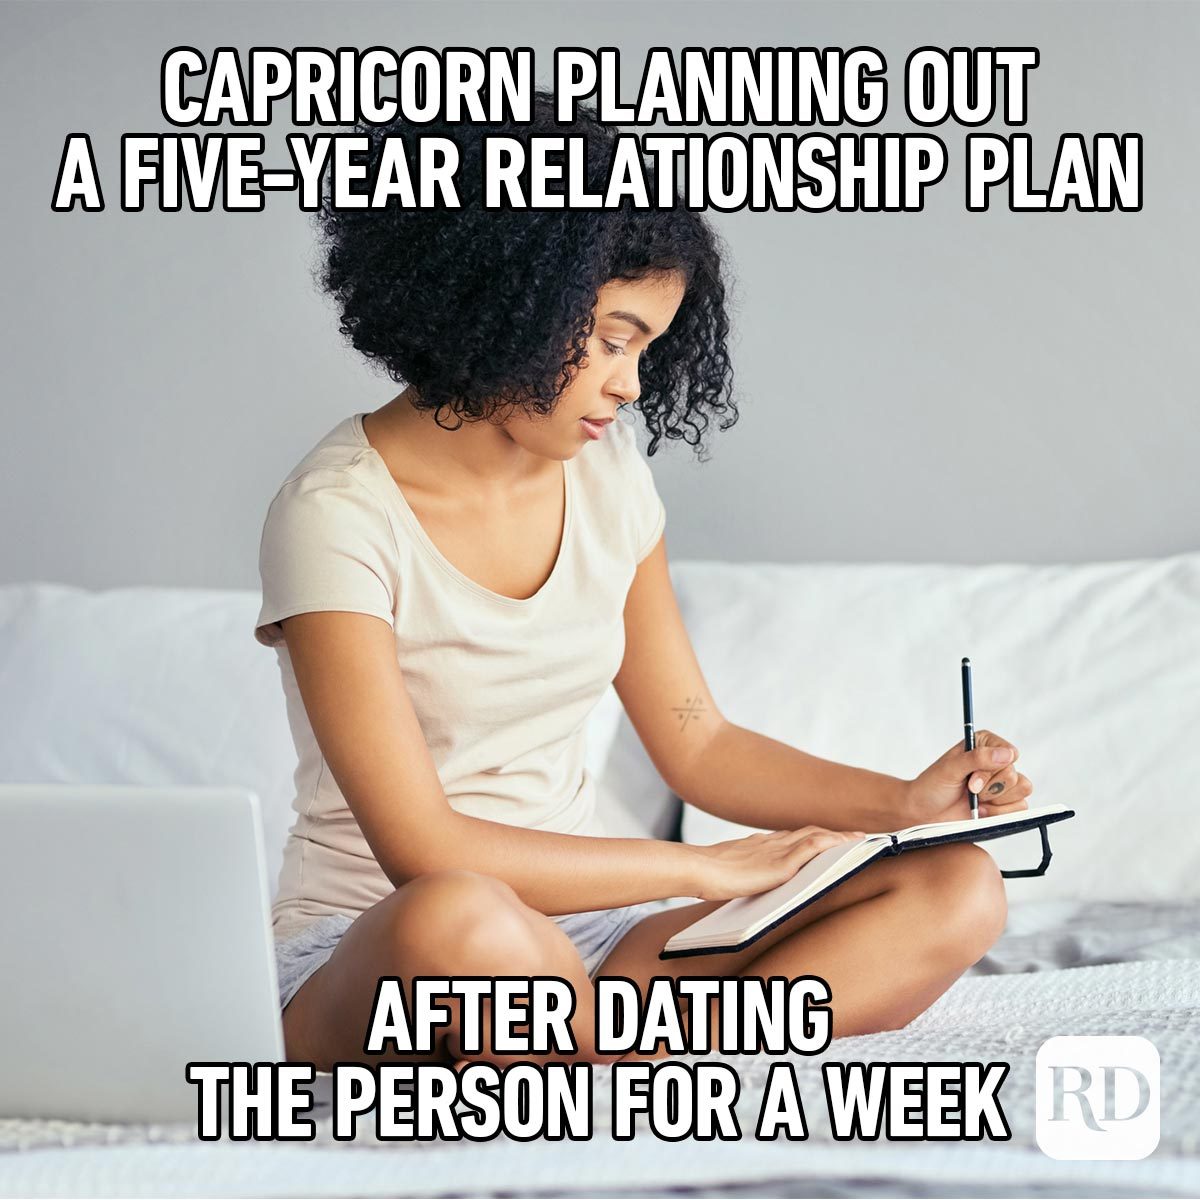 Hilarious Zodiac Memes That'll Crack You Up Capricorn writing in journal planning a week old relationship for the next five years